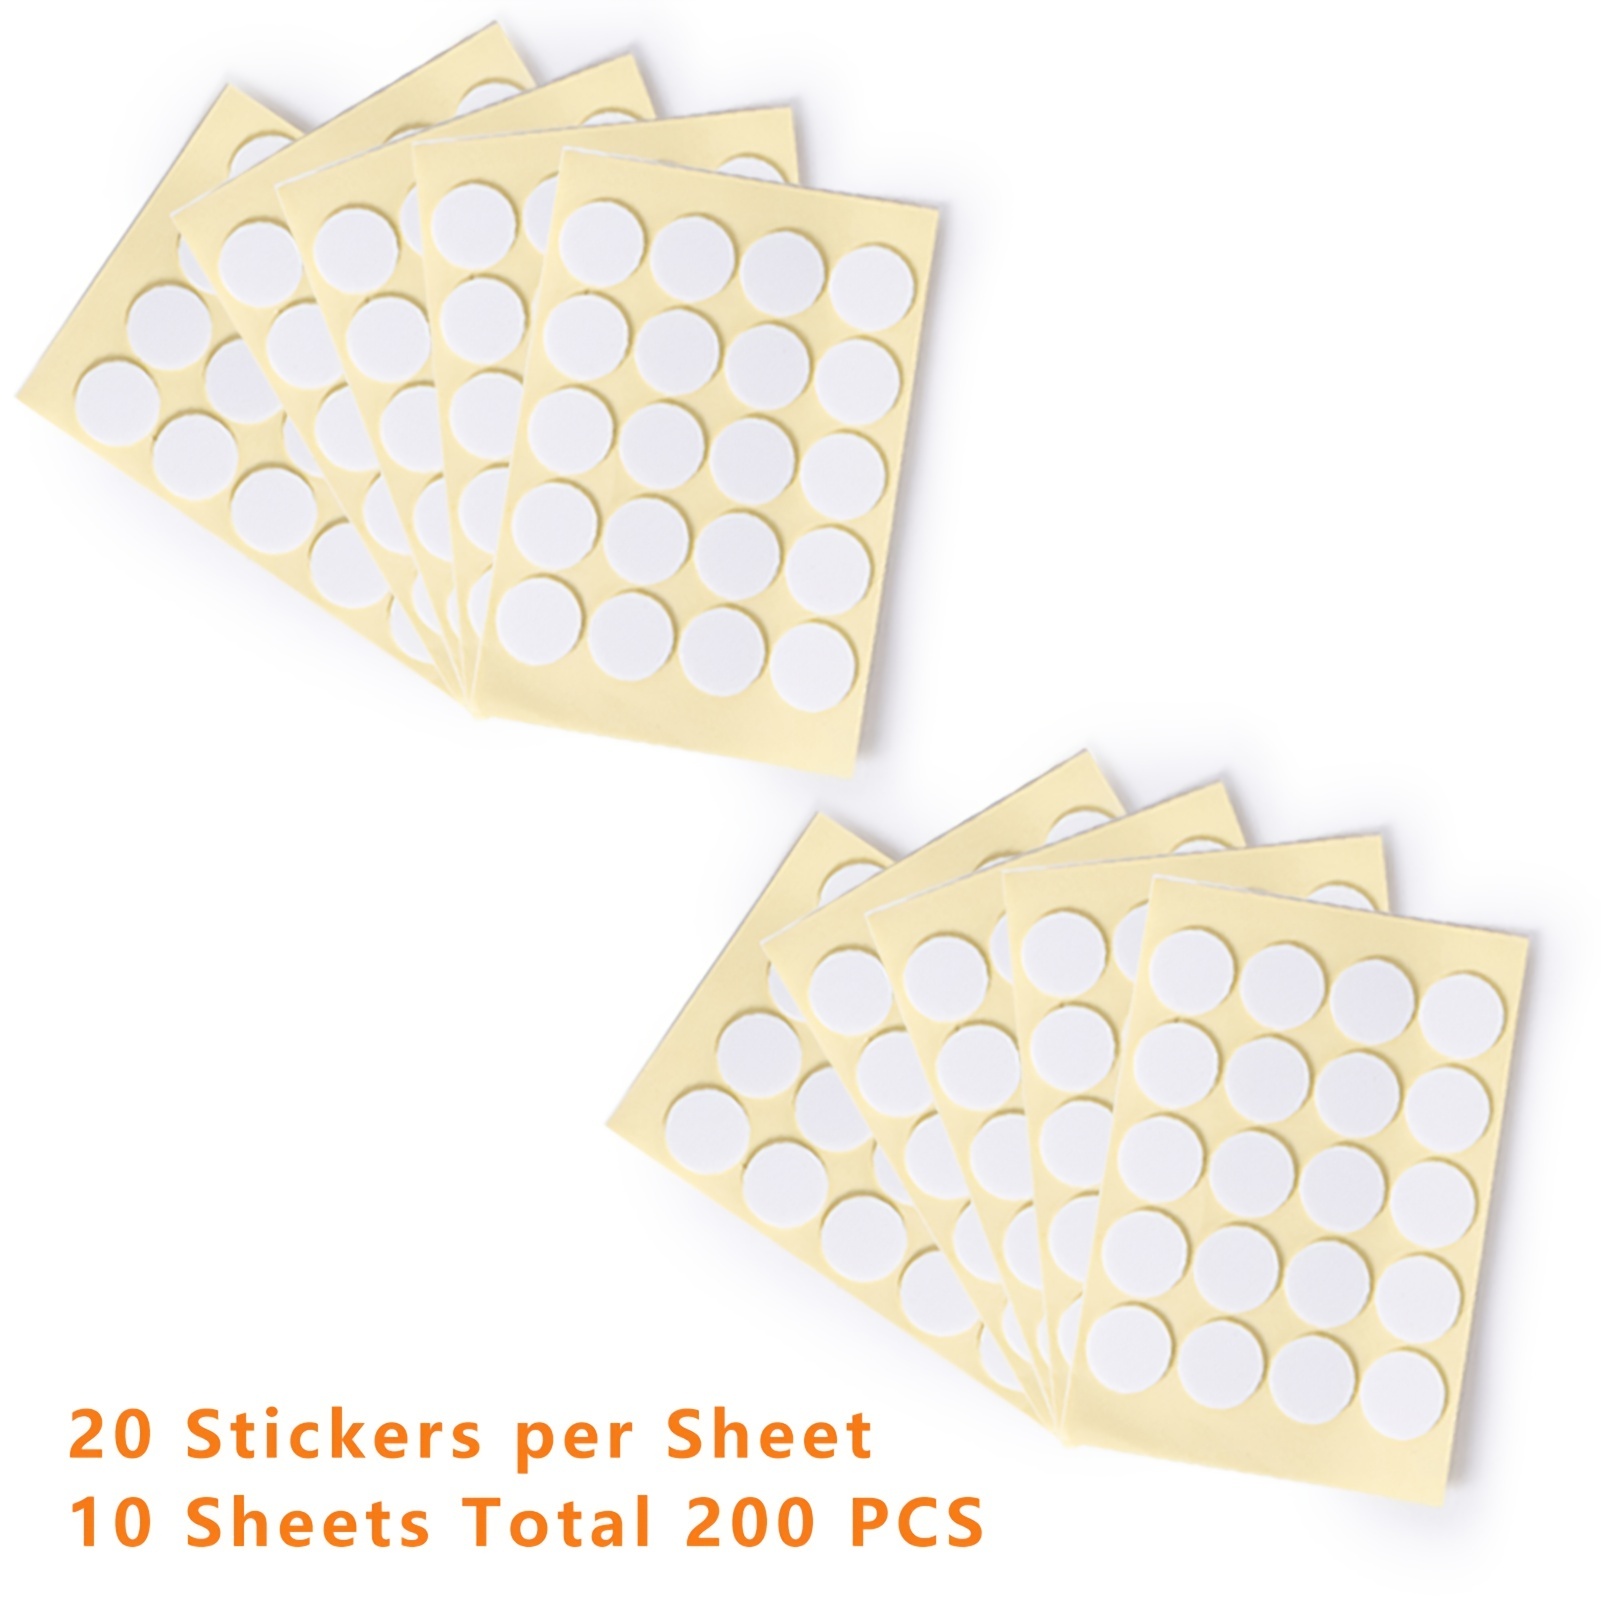 720PCS/36 Sheets Candle Wick Stickers Heat Resistance Double-Sided